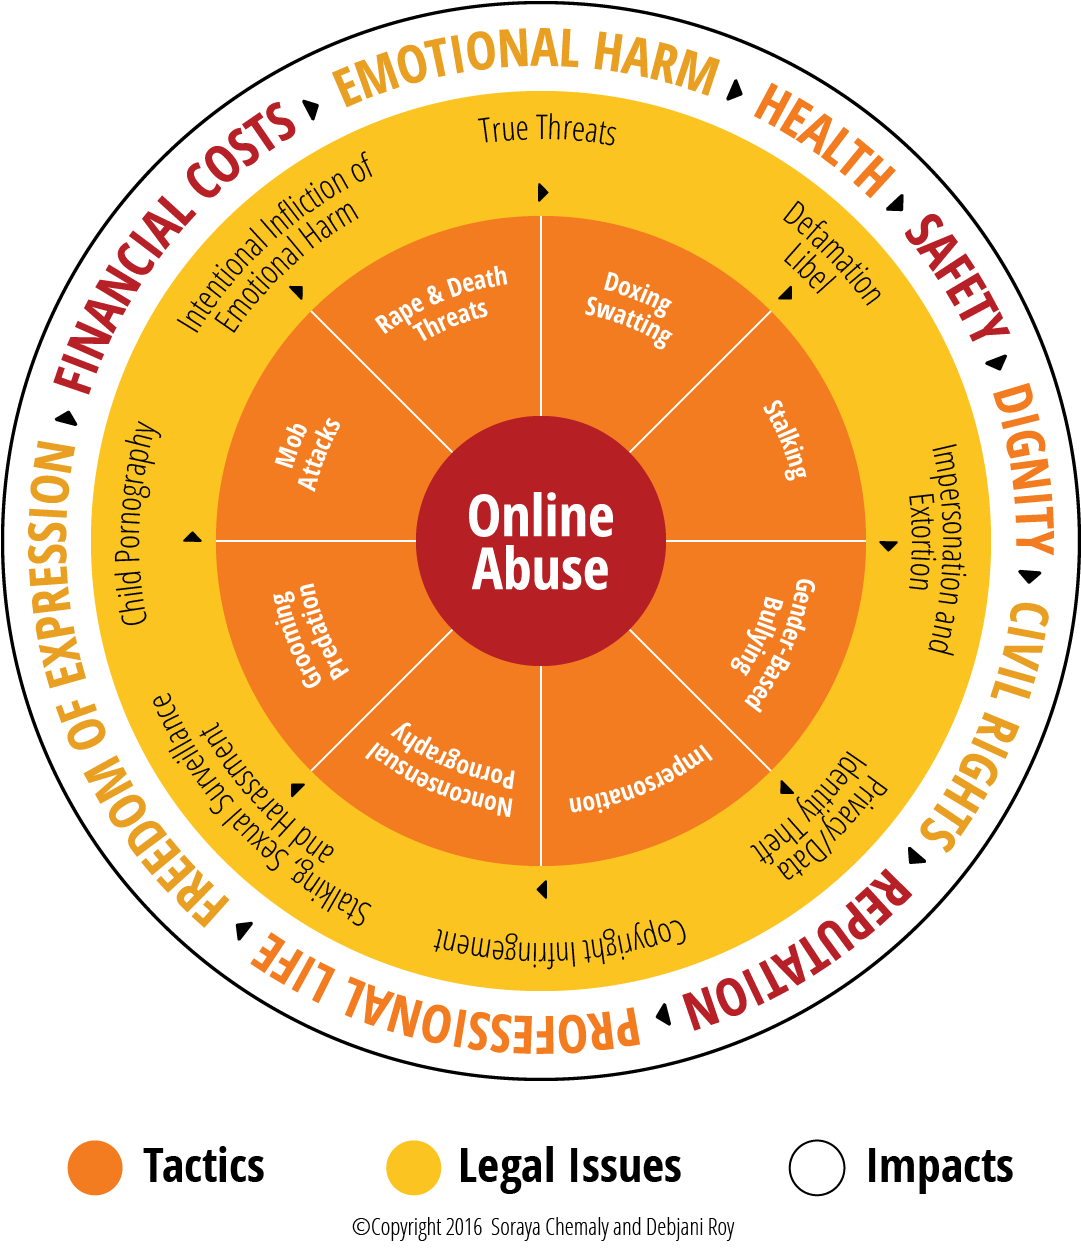 Online Abuse tactics, legal issues, and impacts